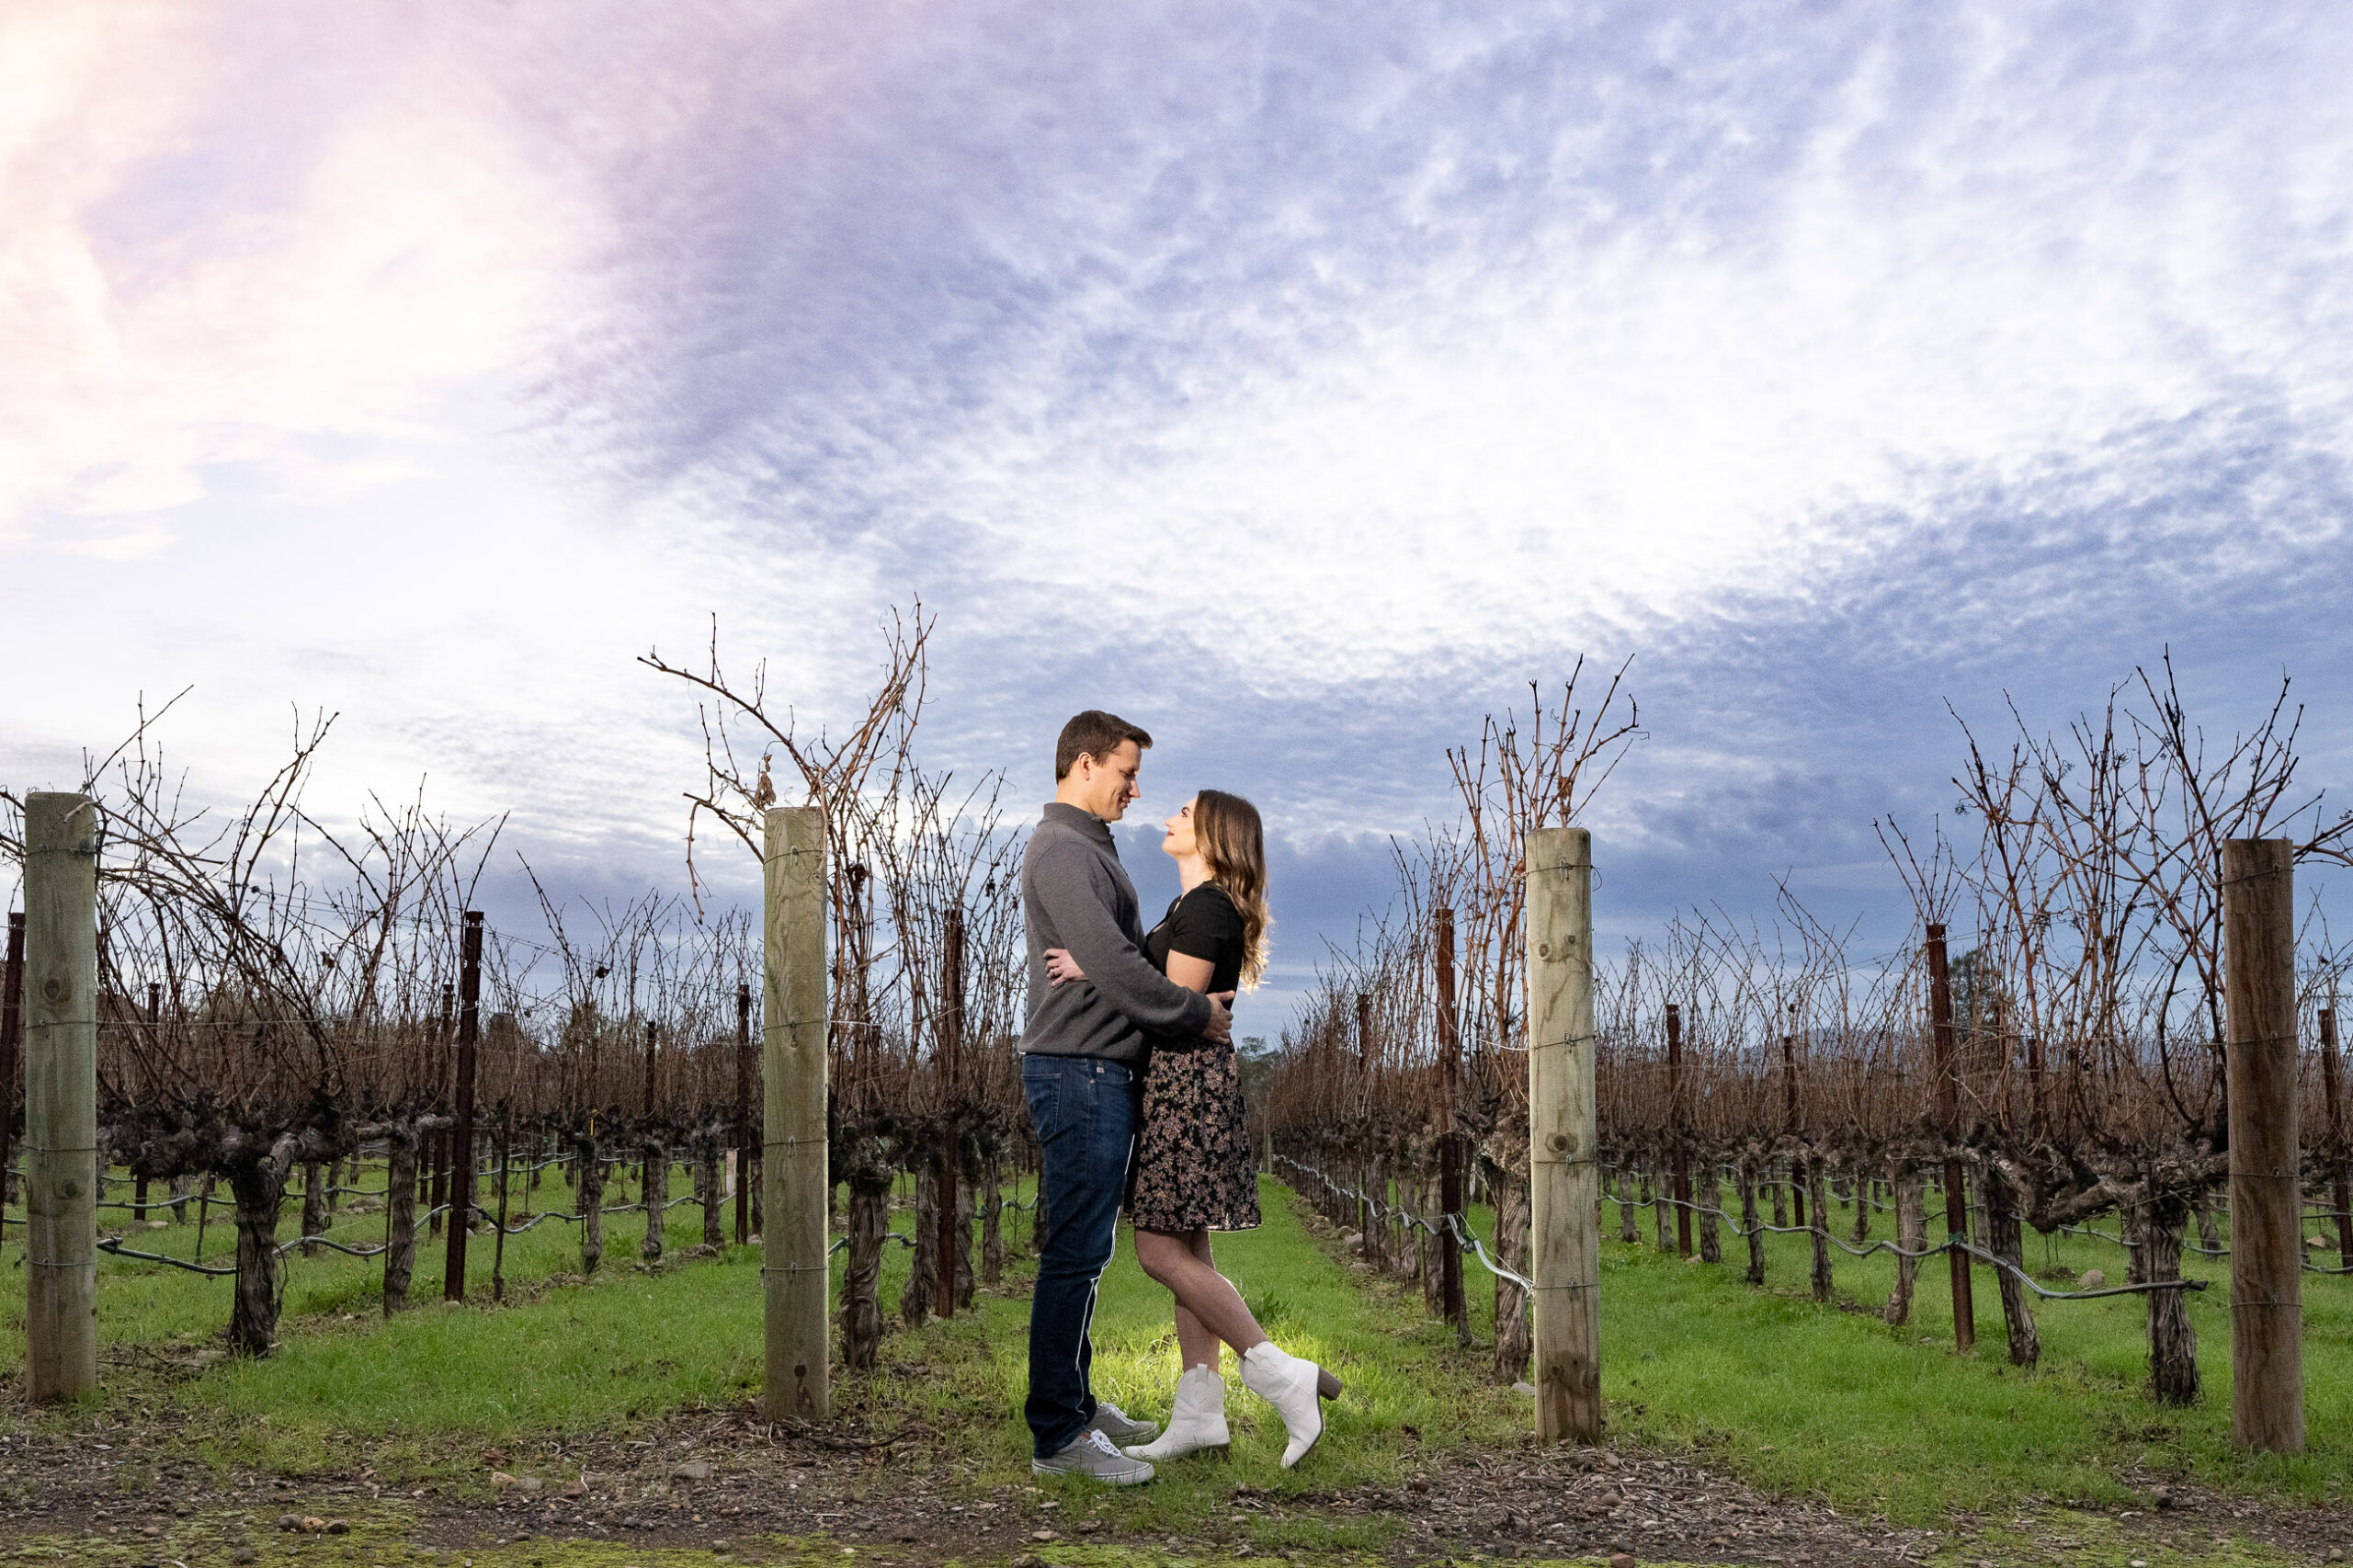 A couple stands facing each other in a vineyard, with bare grapevines and an expansive sky with clouds in the background.